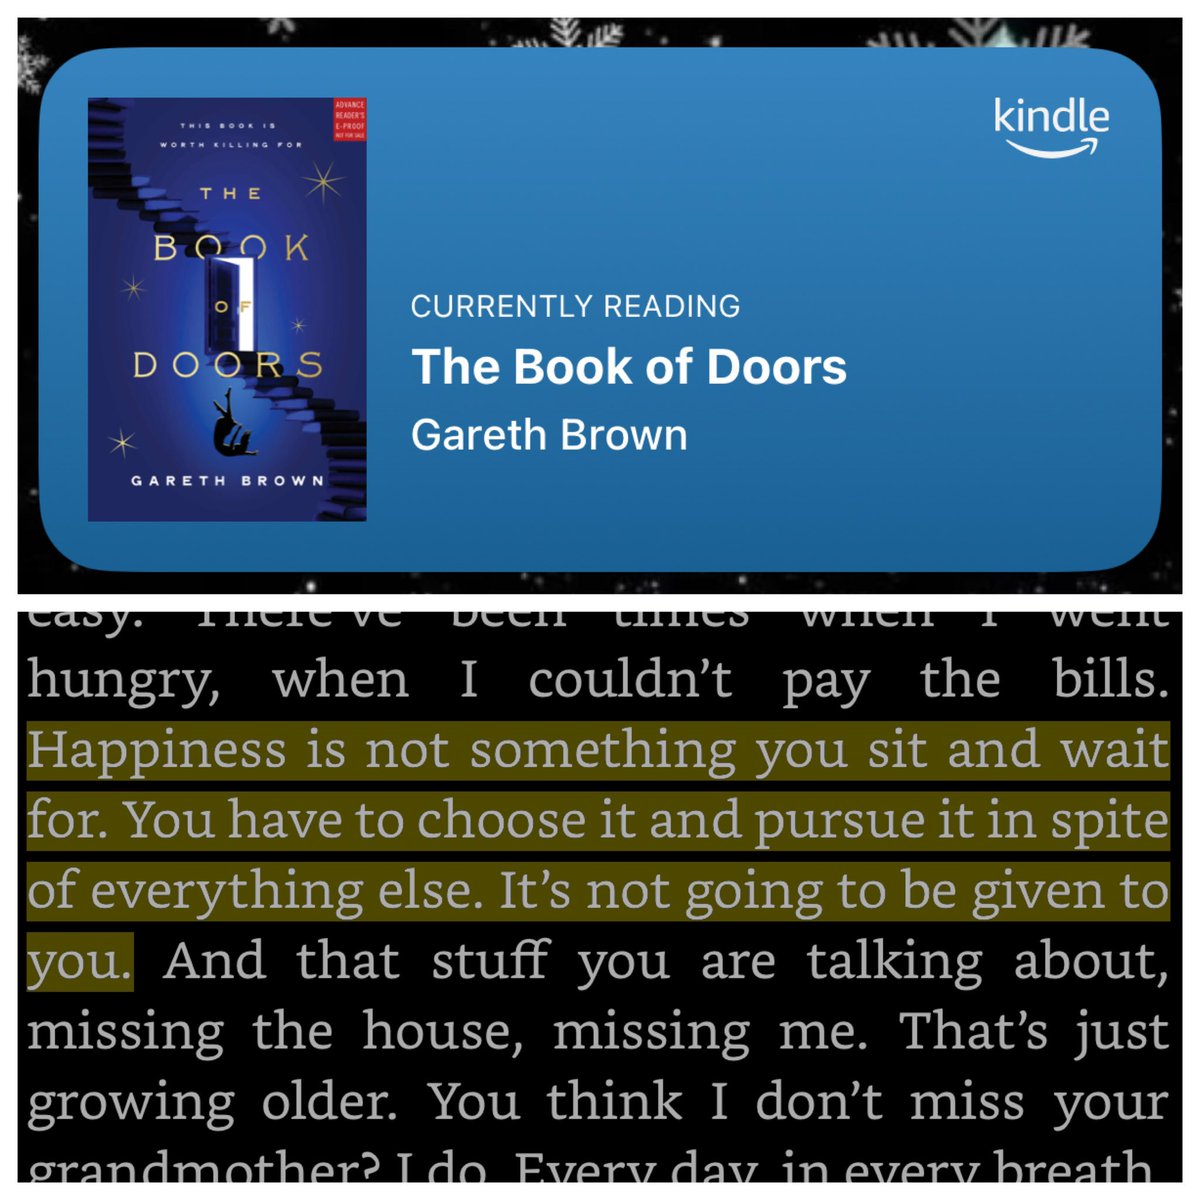 4.5 ⭐️

This book breathes new life into the power of books, the magic we all feel when we find a captivating story & is a masterclass of writing, storytelling, and connection. The intricacies are just superb 

#NetGalley 
#thebookofdoors